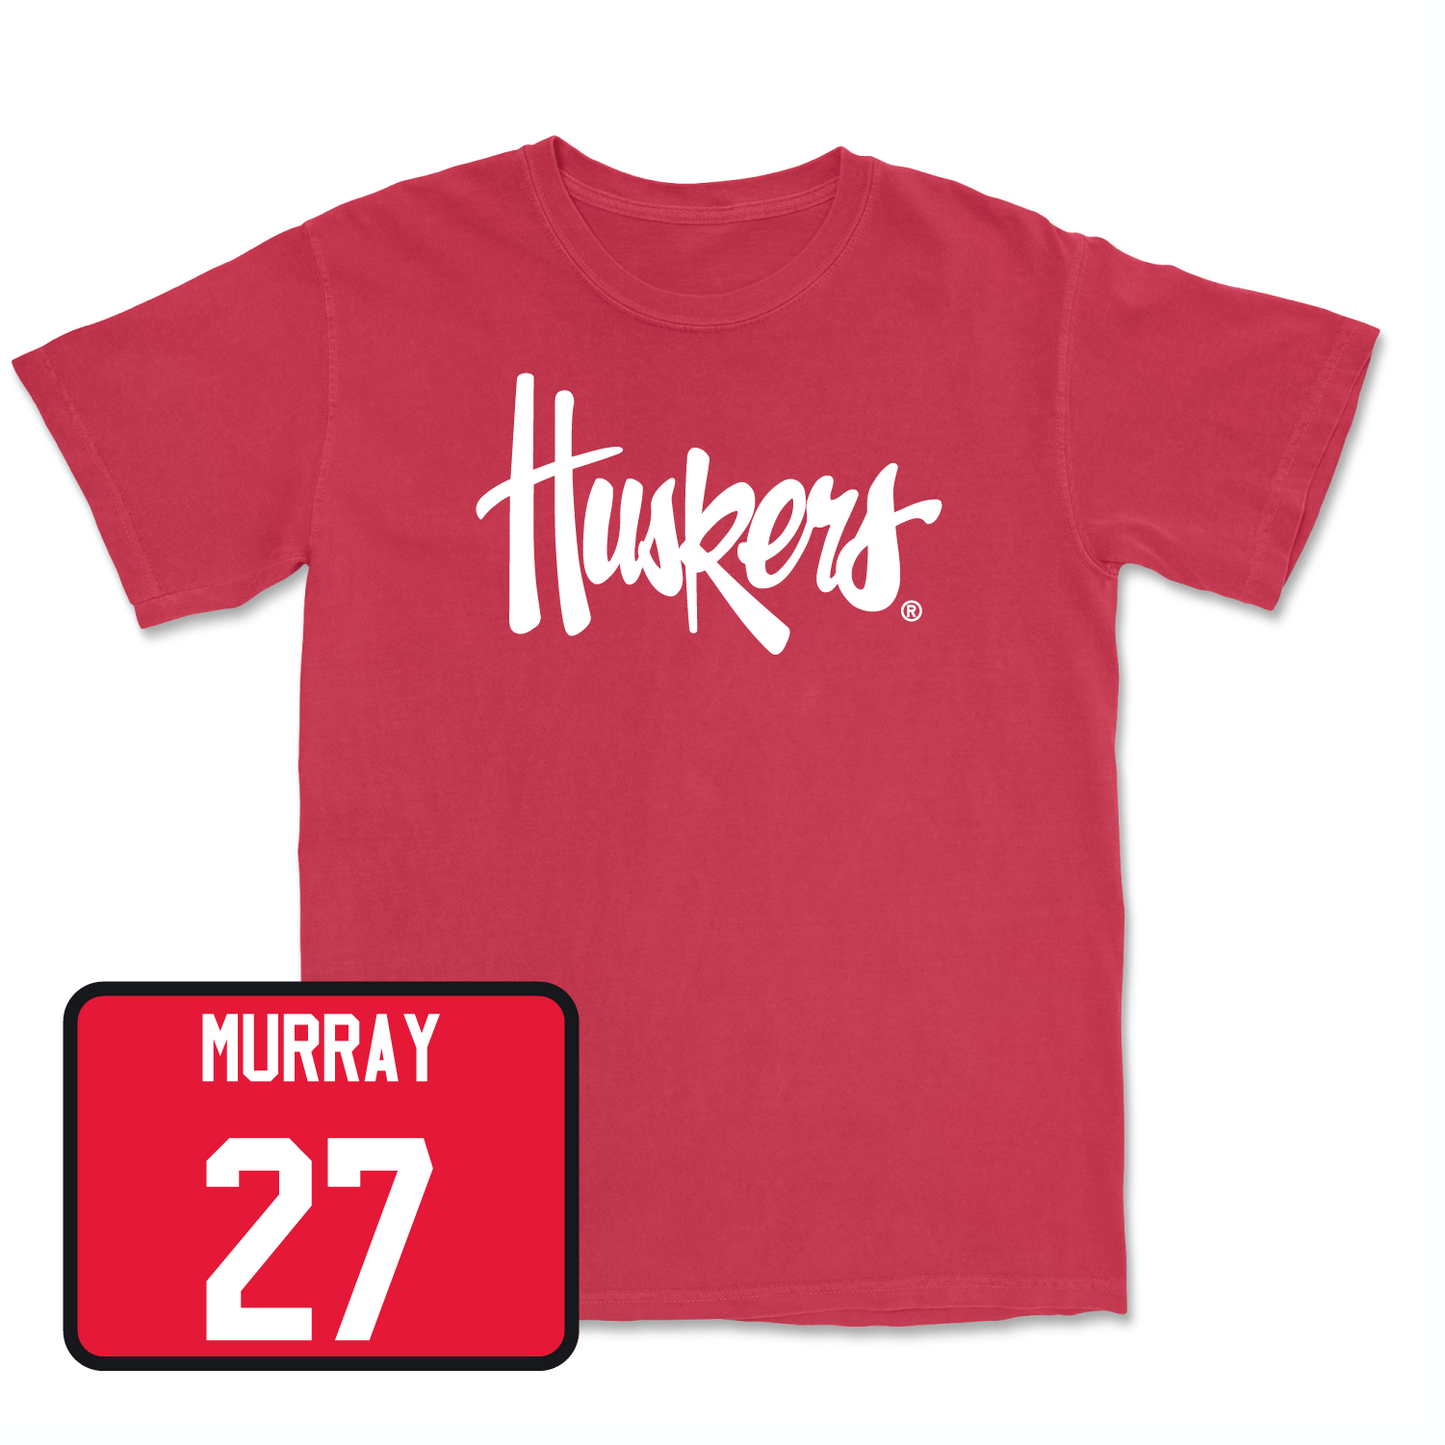 Red Women's Volleyball Huskers Tee X-Large / Harper Murray | #27